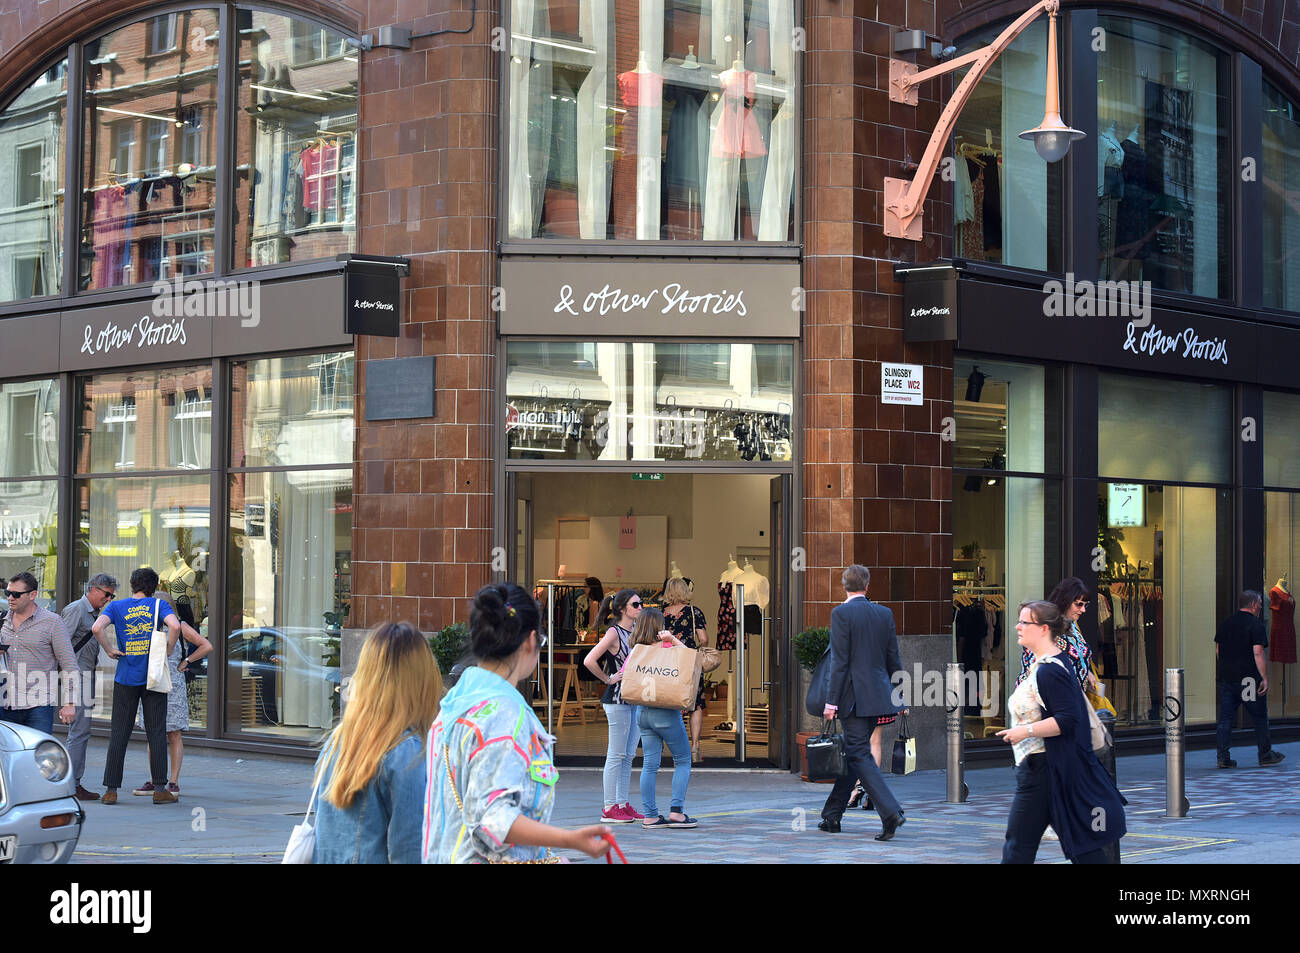 Tourists and shoppers walk past the H&M Group women’s clothing retailer & Other Stories, in Covent Garden, London. Stock Photo